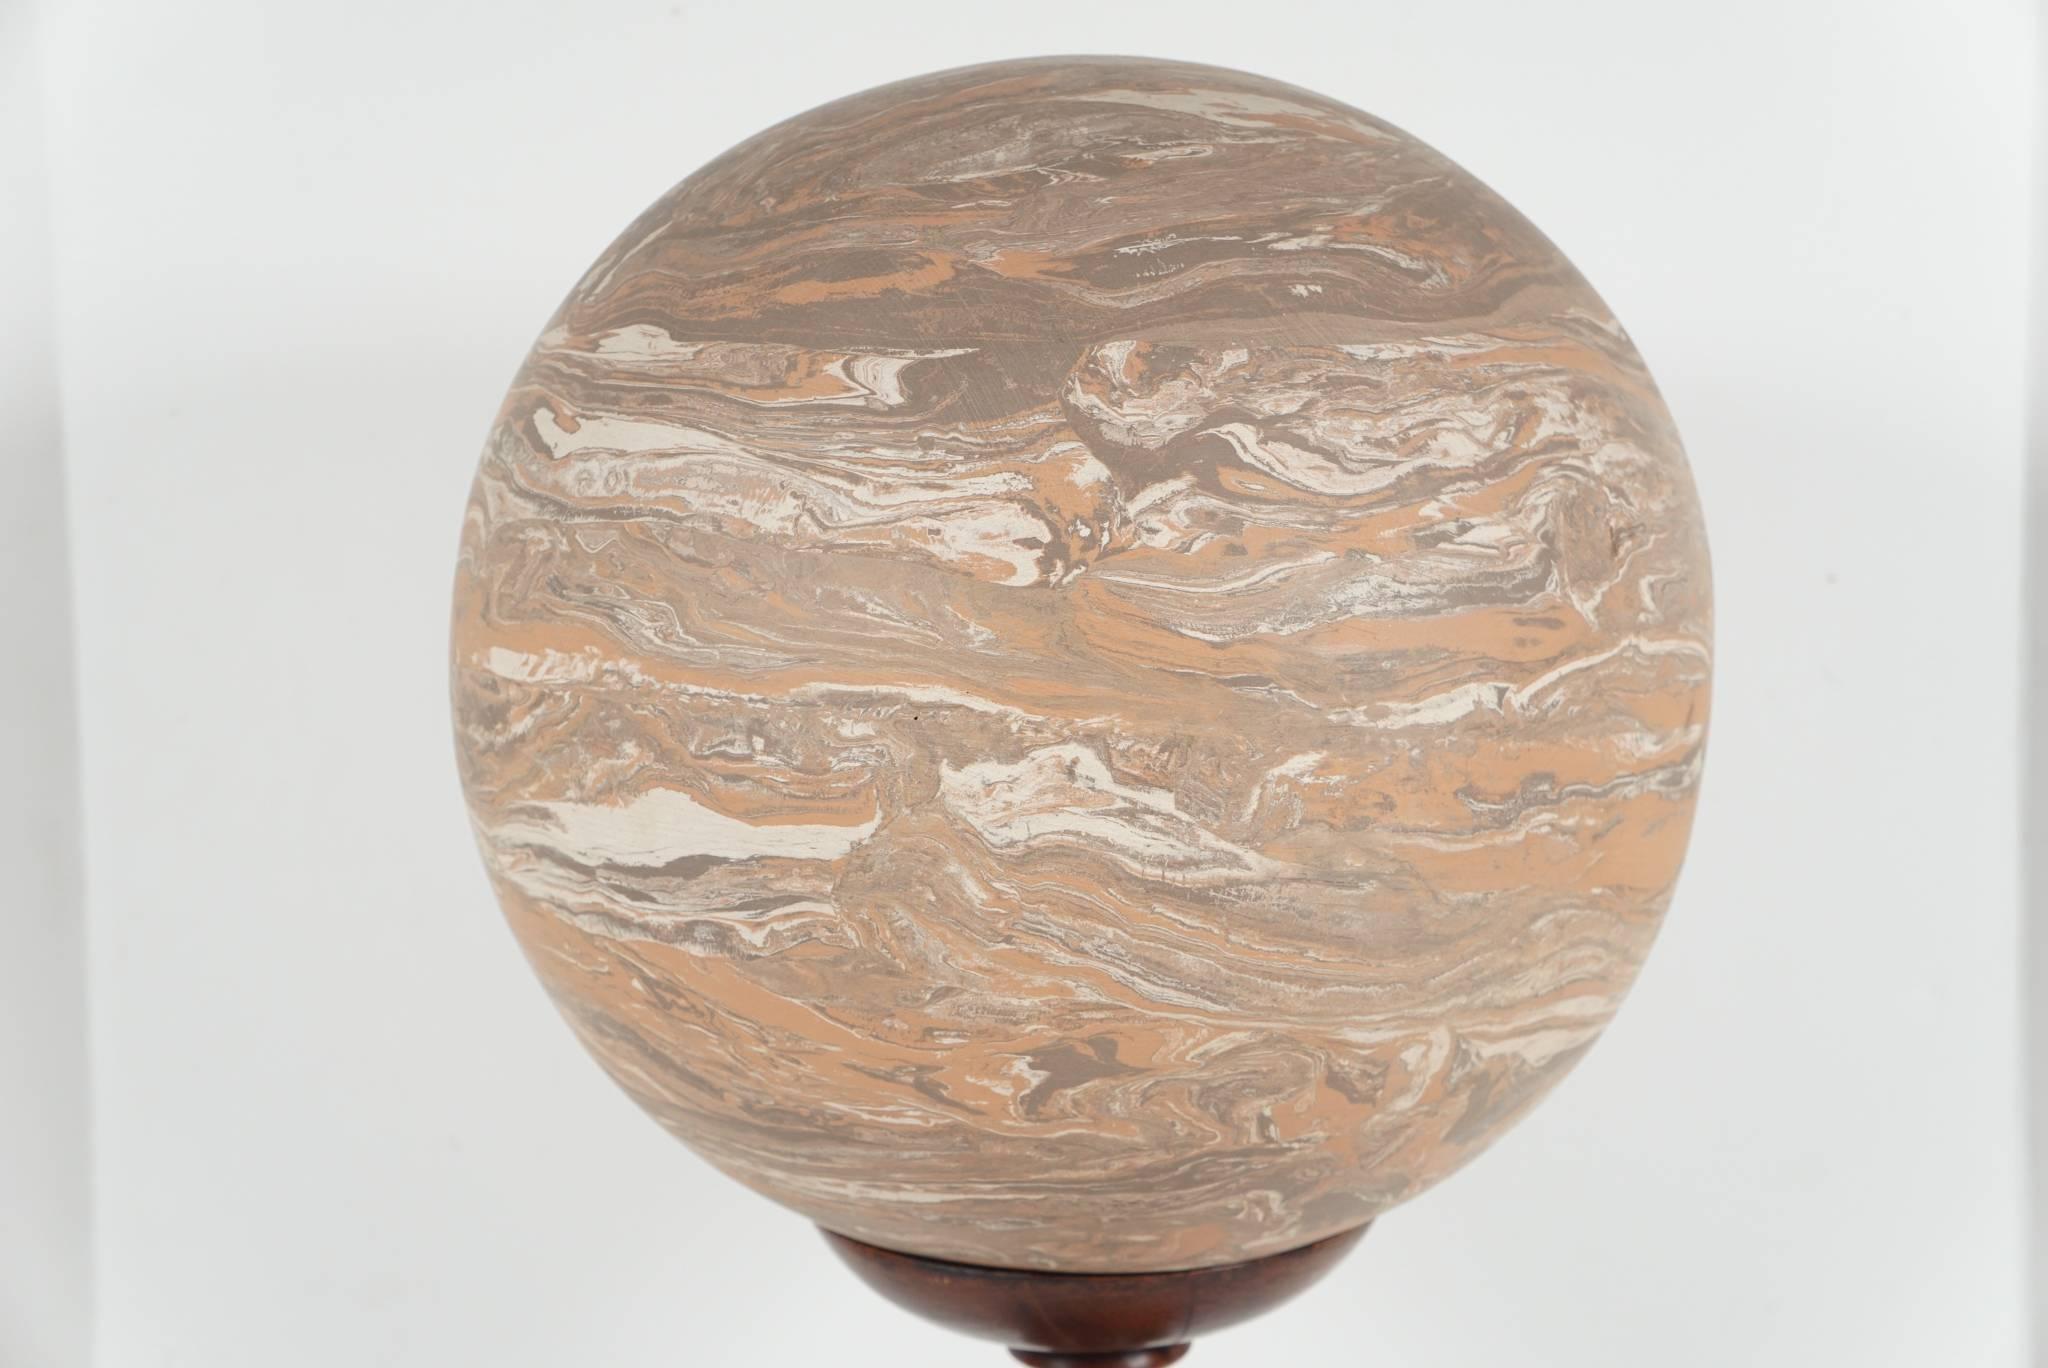 This Italian marbled terra cotta ball comes from Oak Springs Farm, the Virginia estate of Paul & Bunny Mellon. The sphere is late 19th century and has been set on a well-turned walnut stand. Made as purely a decorative object the sphere is very